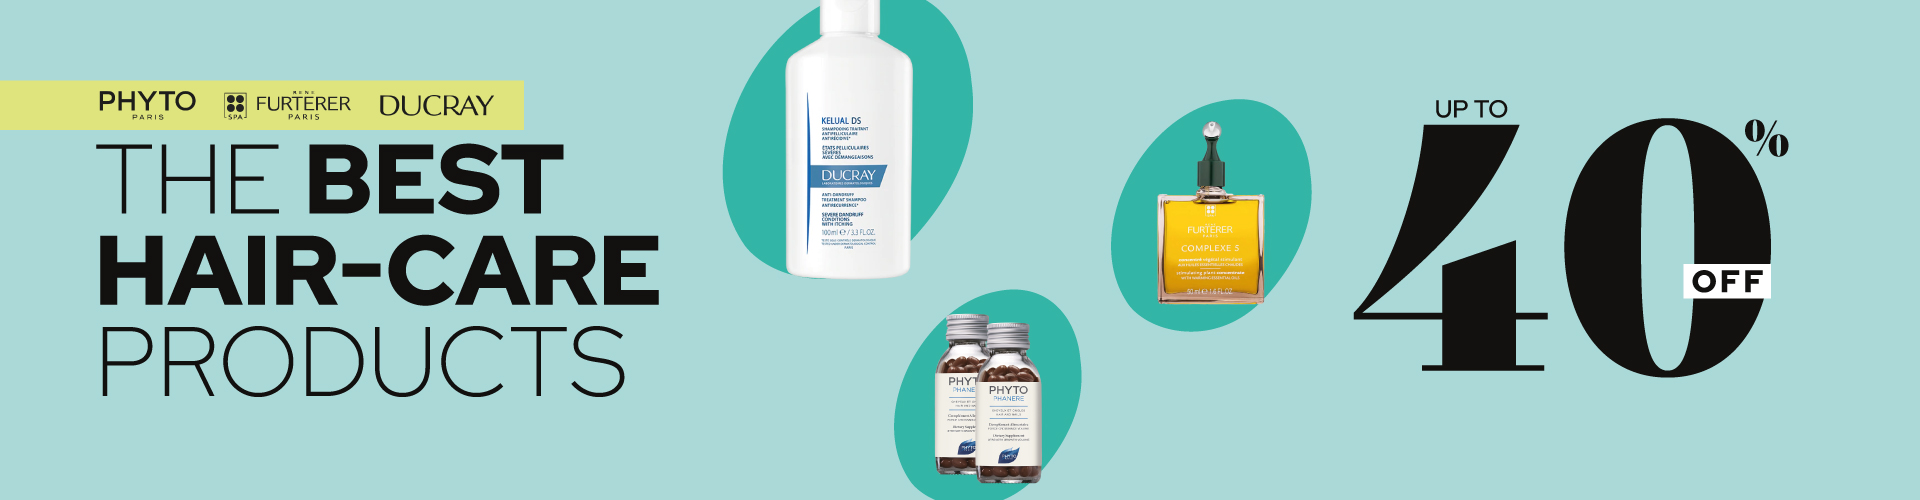 The Best Hair-Care Products 